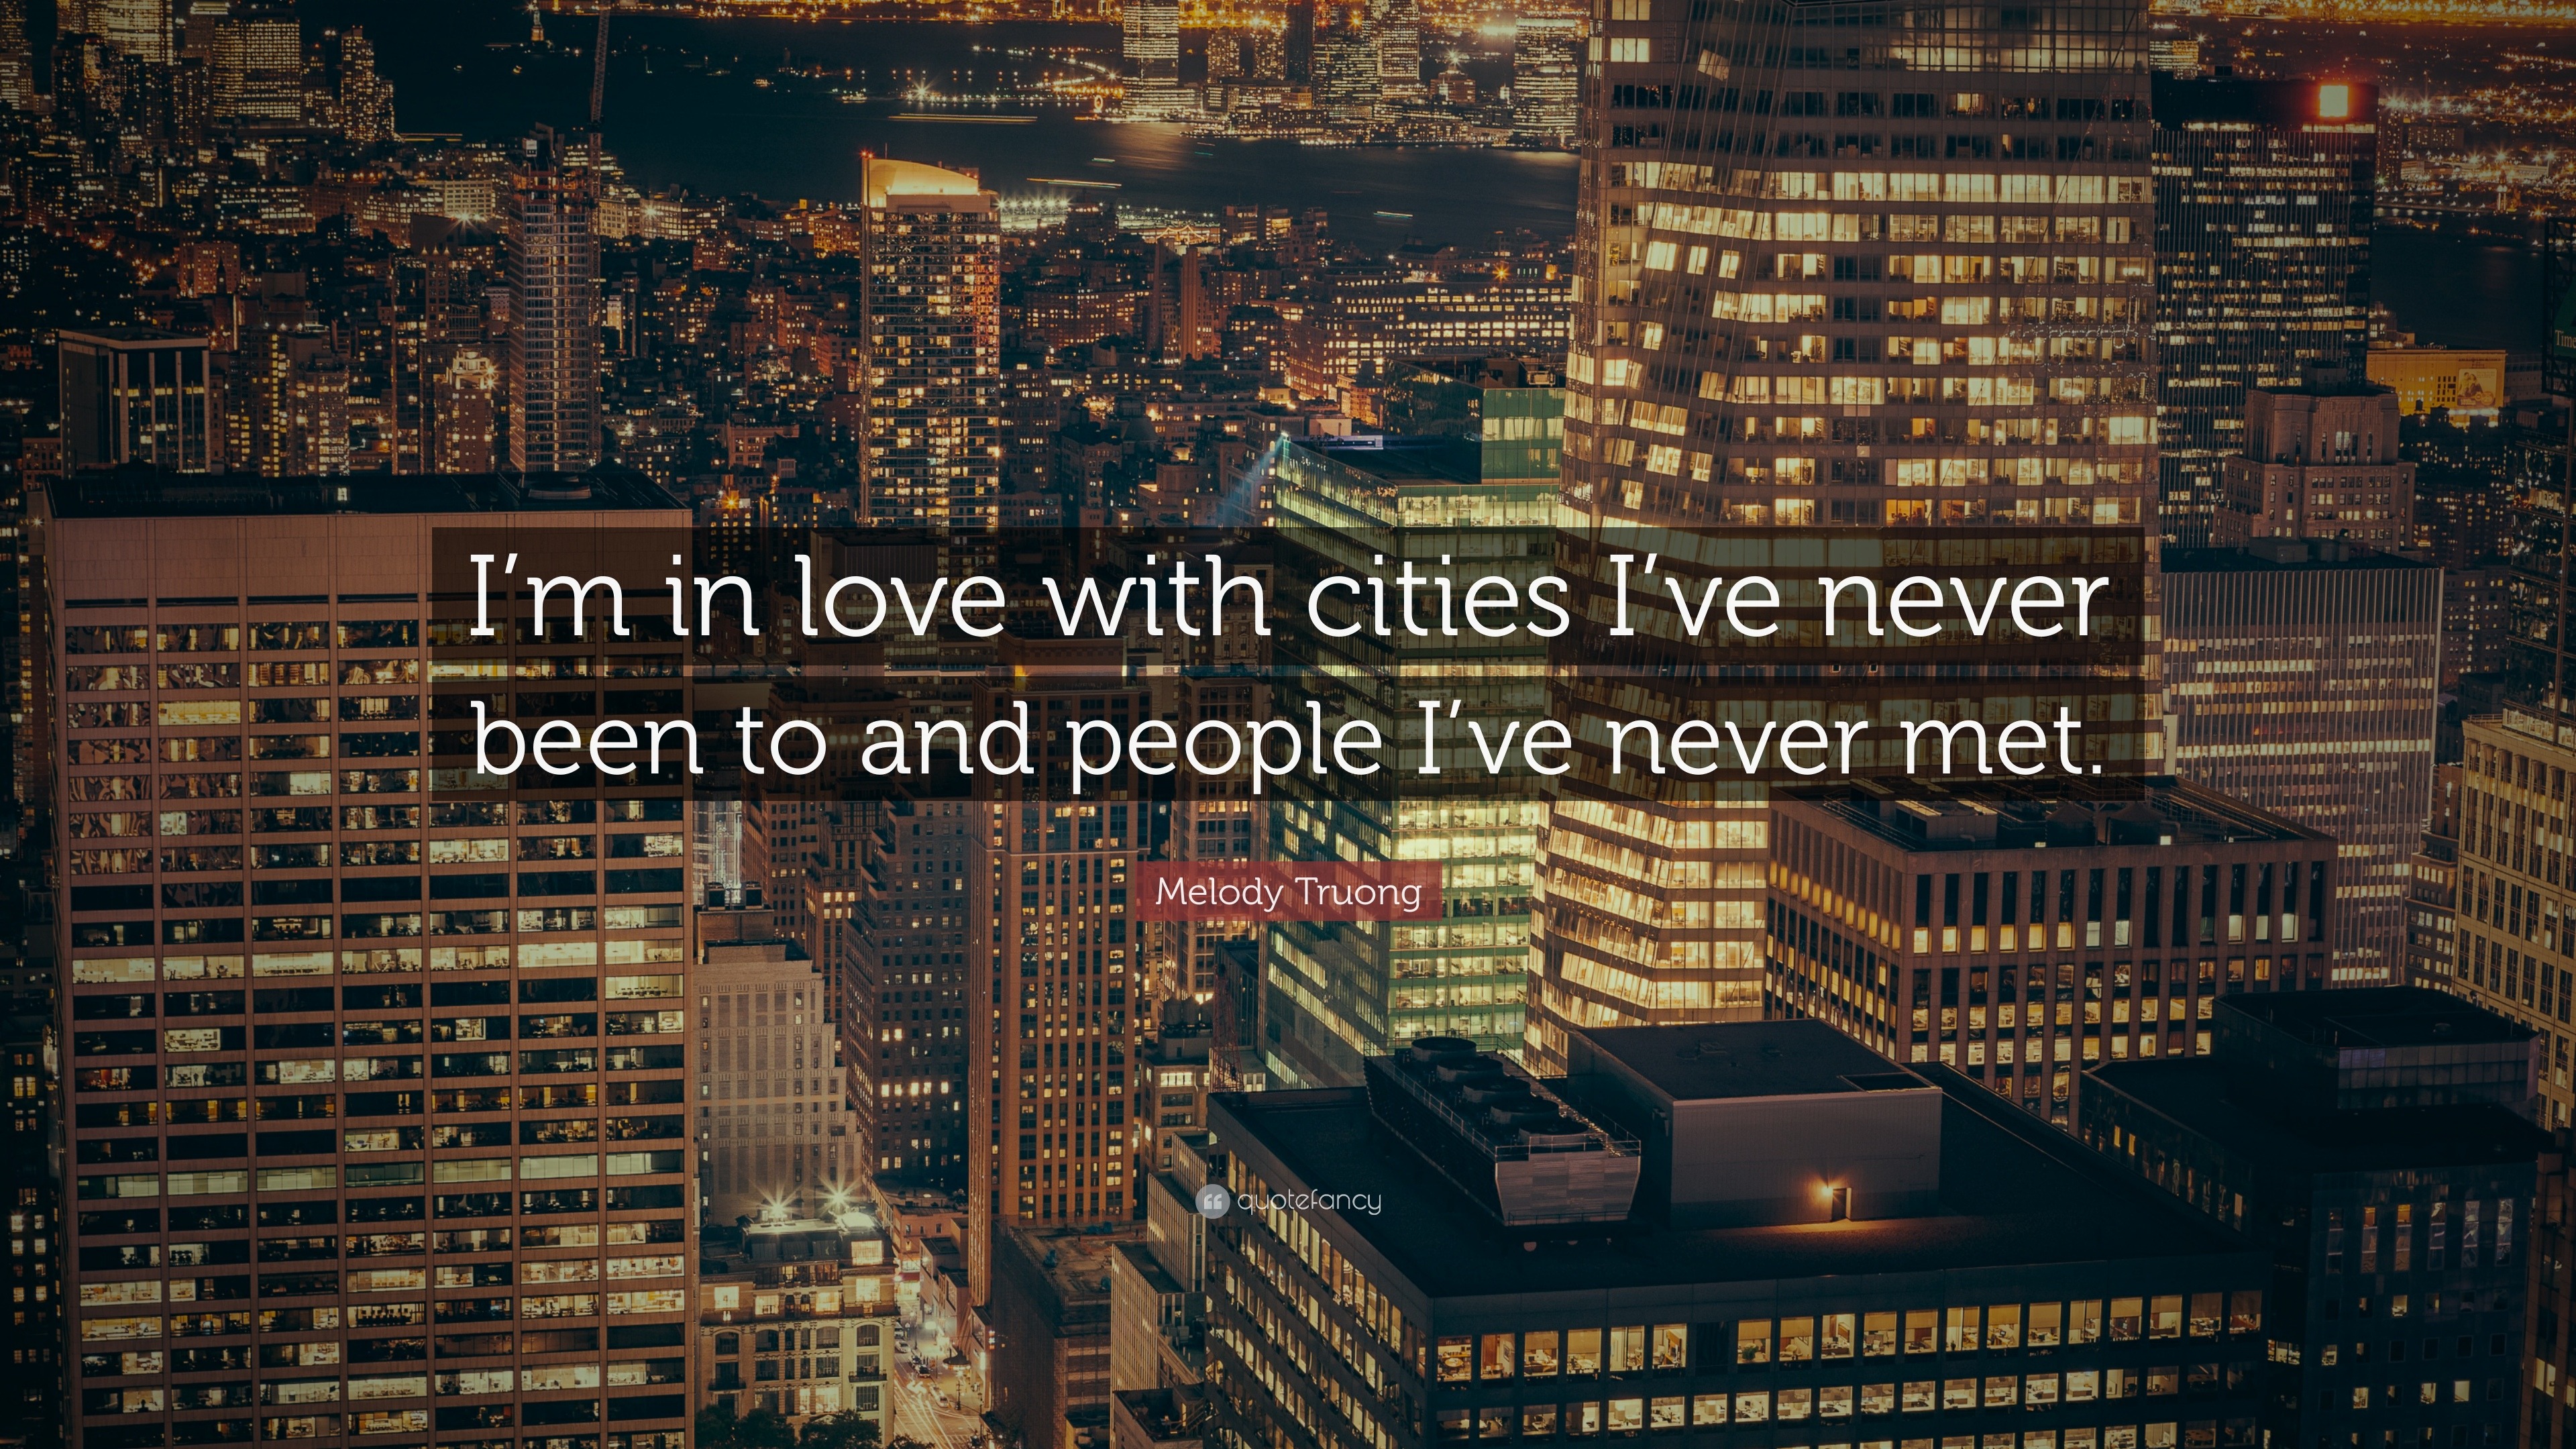 Melody Truong Quote: “I’m in love with cities I’ve never been to and